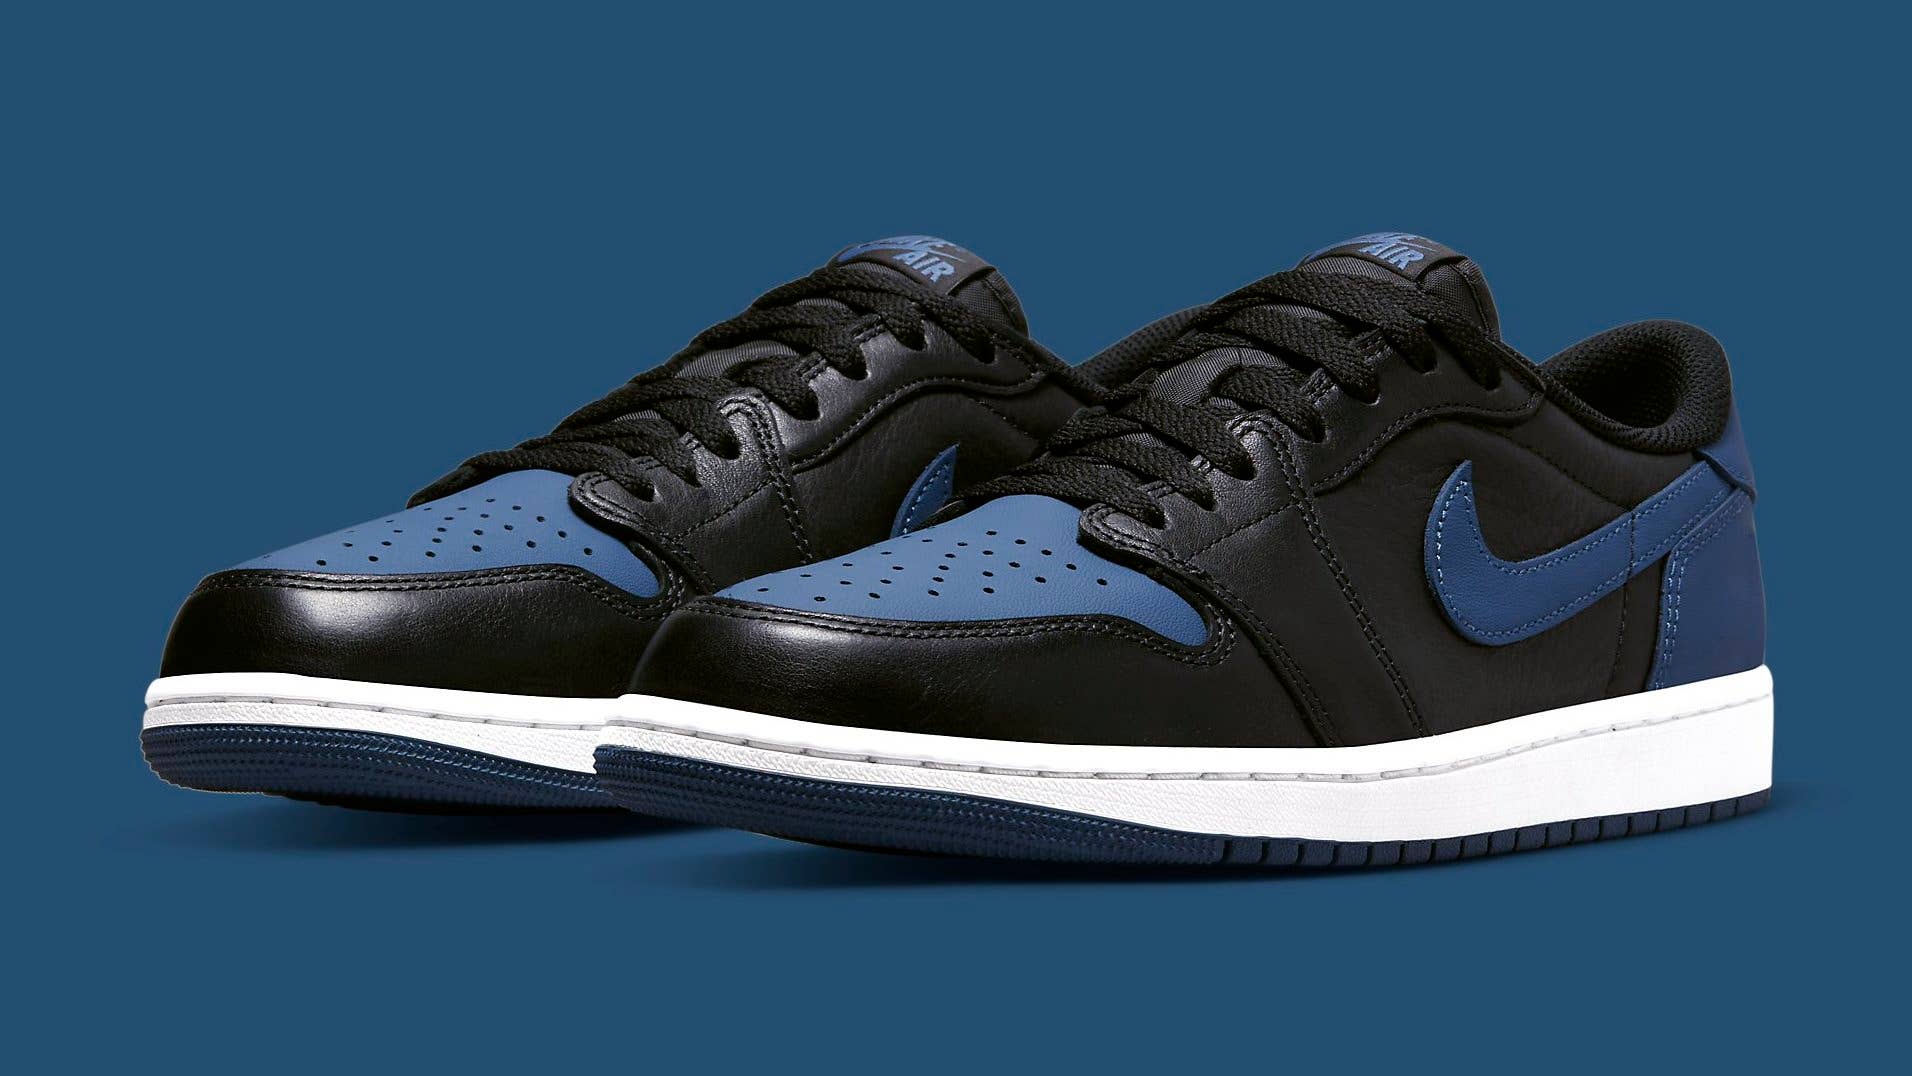 Mystic Navy' Air Jordan 1 Lows Are Dropping This Month